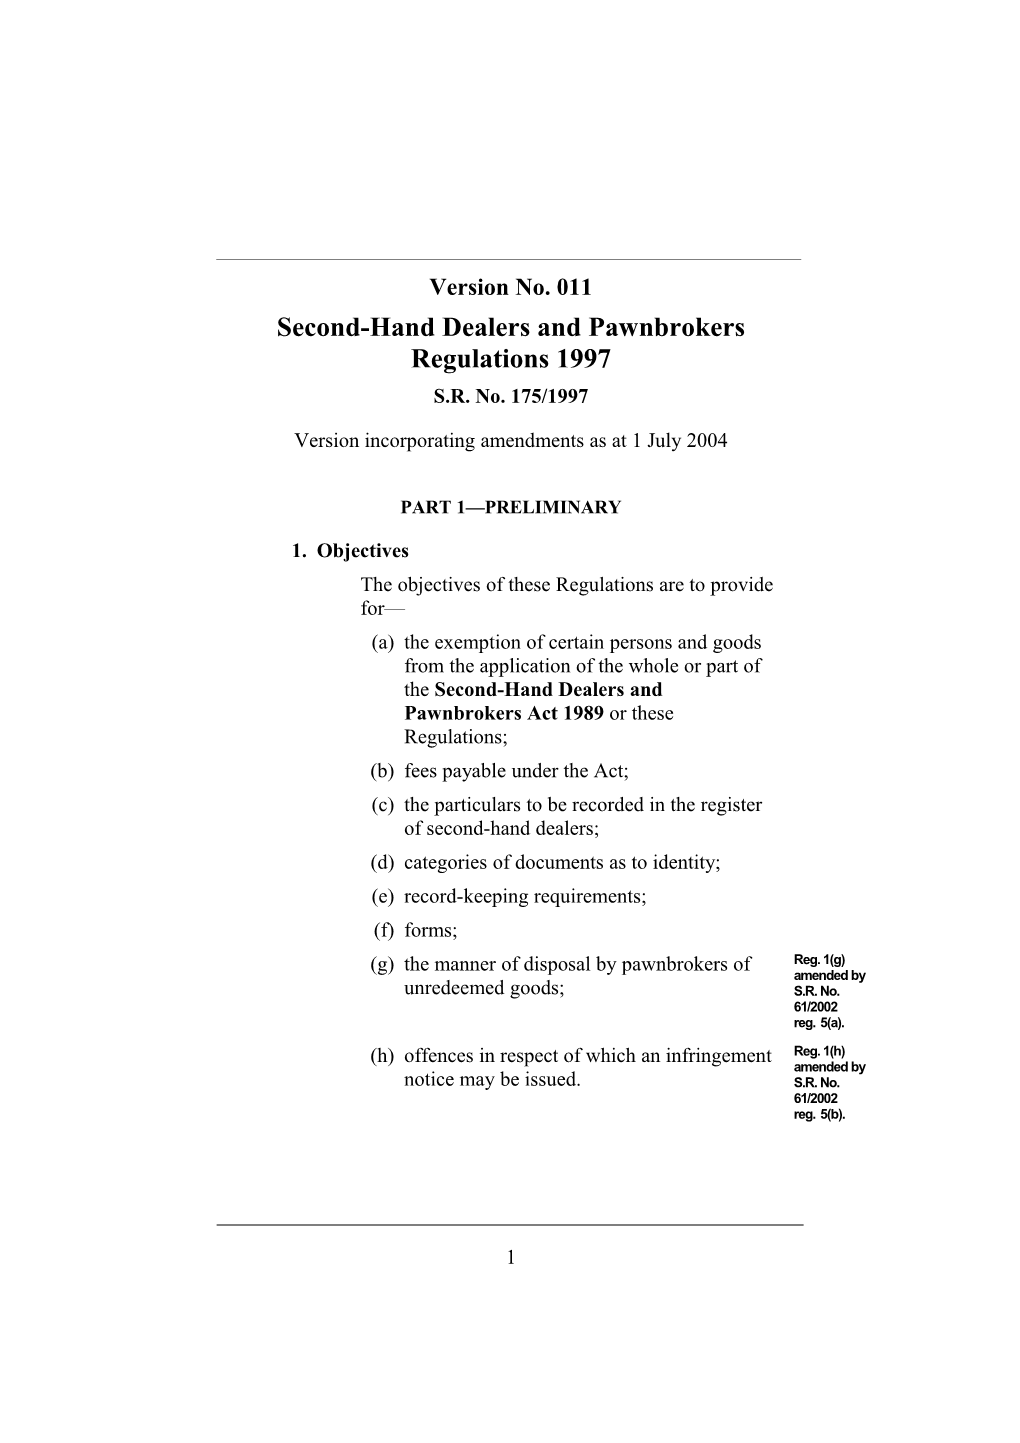 Second-Hand Dealers and Pawnbrokers Regulations 1997